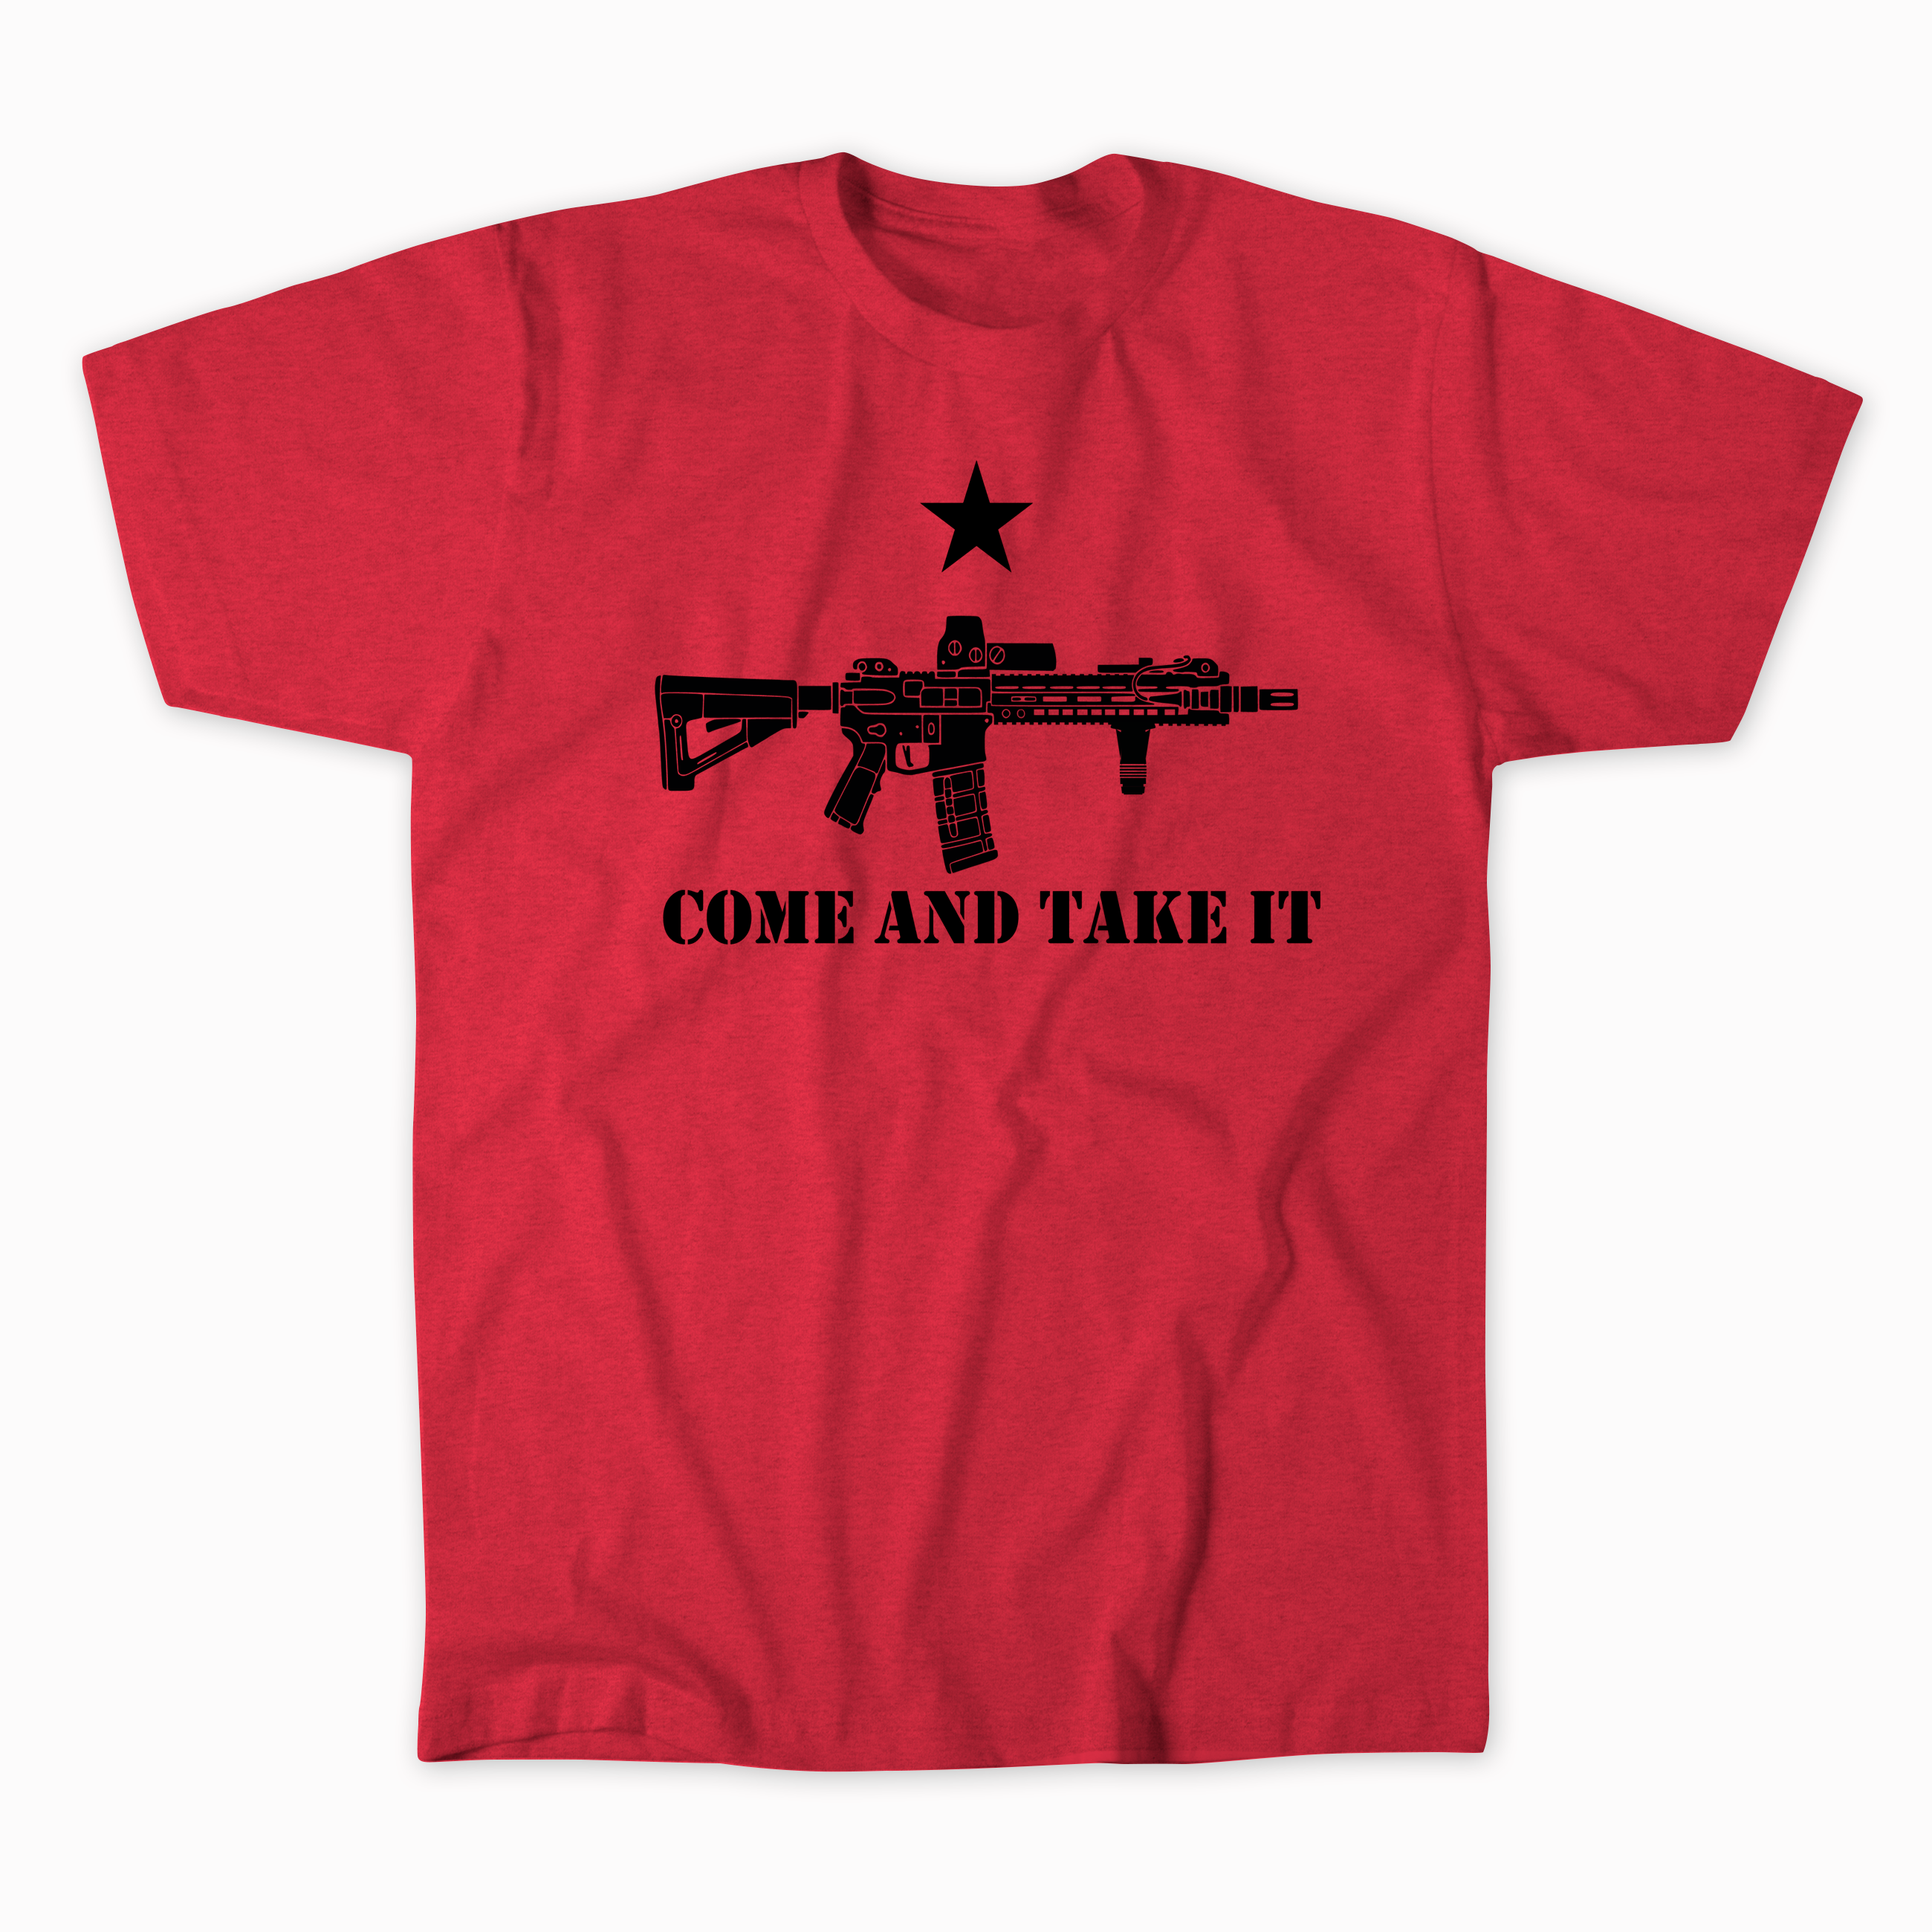 Shirt - Men's Come And Take It – Scroll Factory